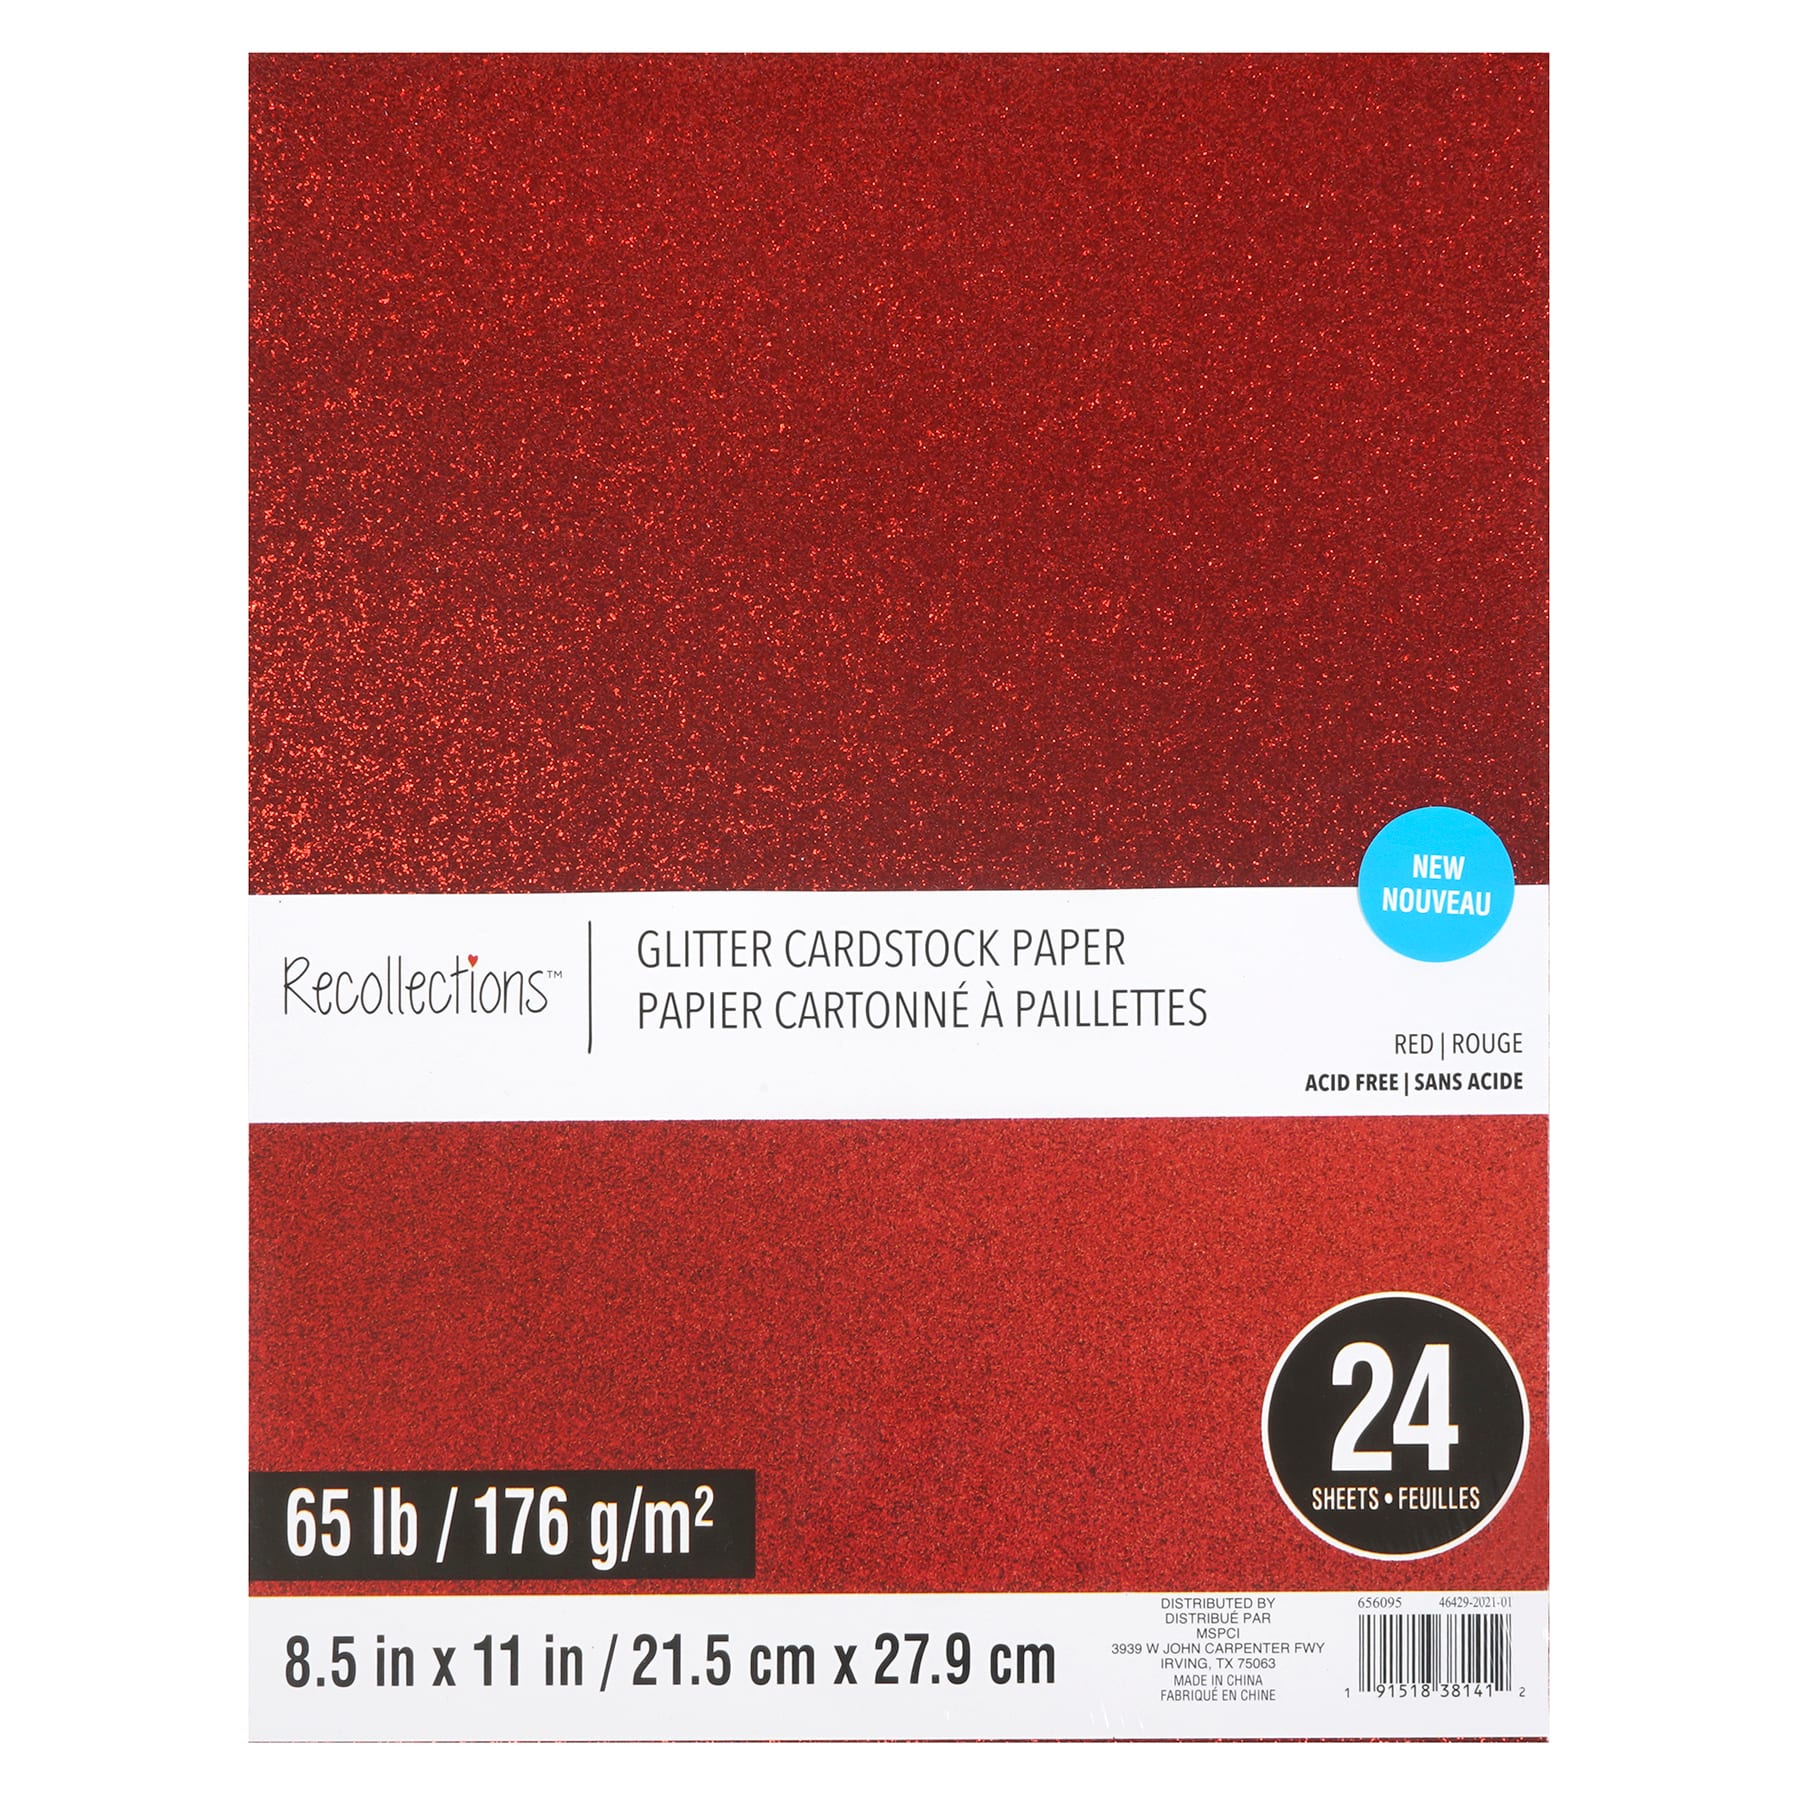 30 Sheets Red Glitter Cardstock Paper for DIY Crafts, Card Making,  Invitations, Double-Sided, 300gsm (8.5 x 11 In)